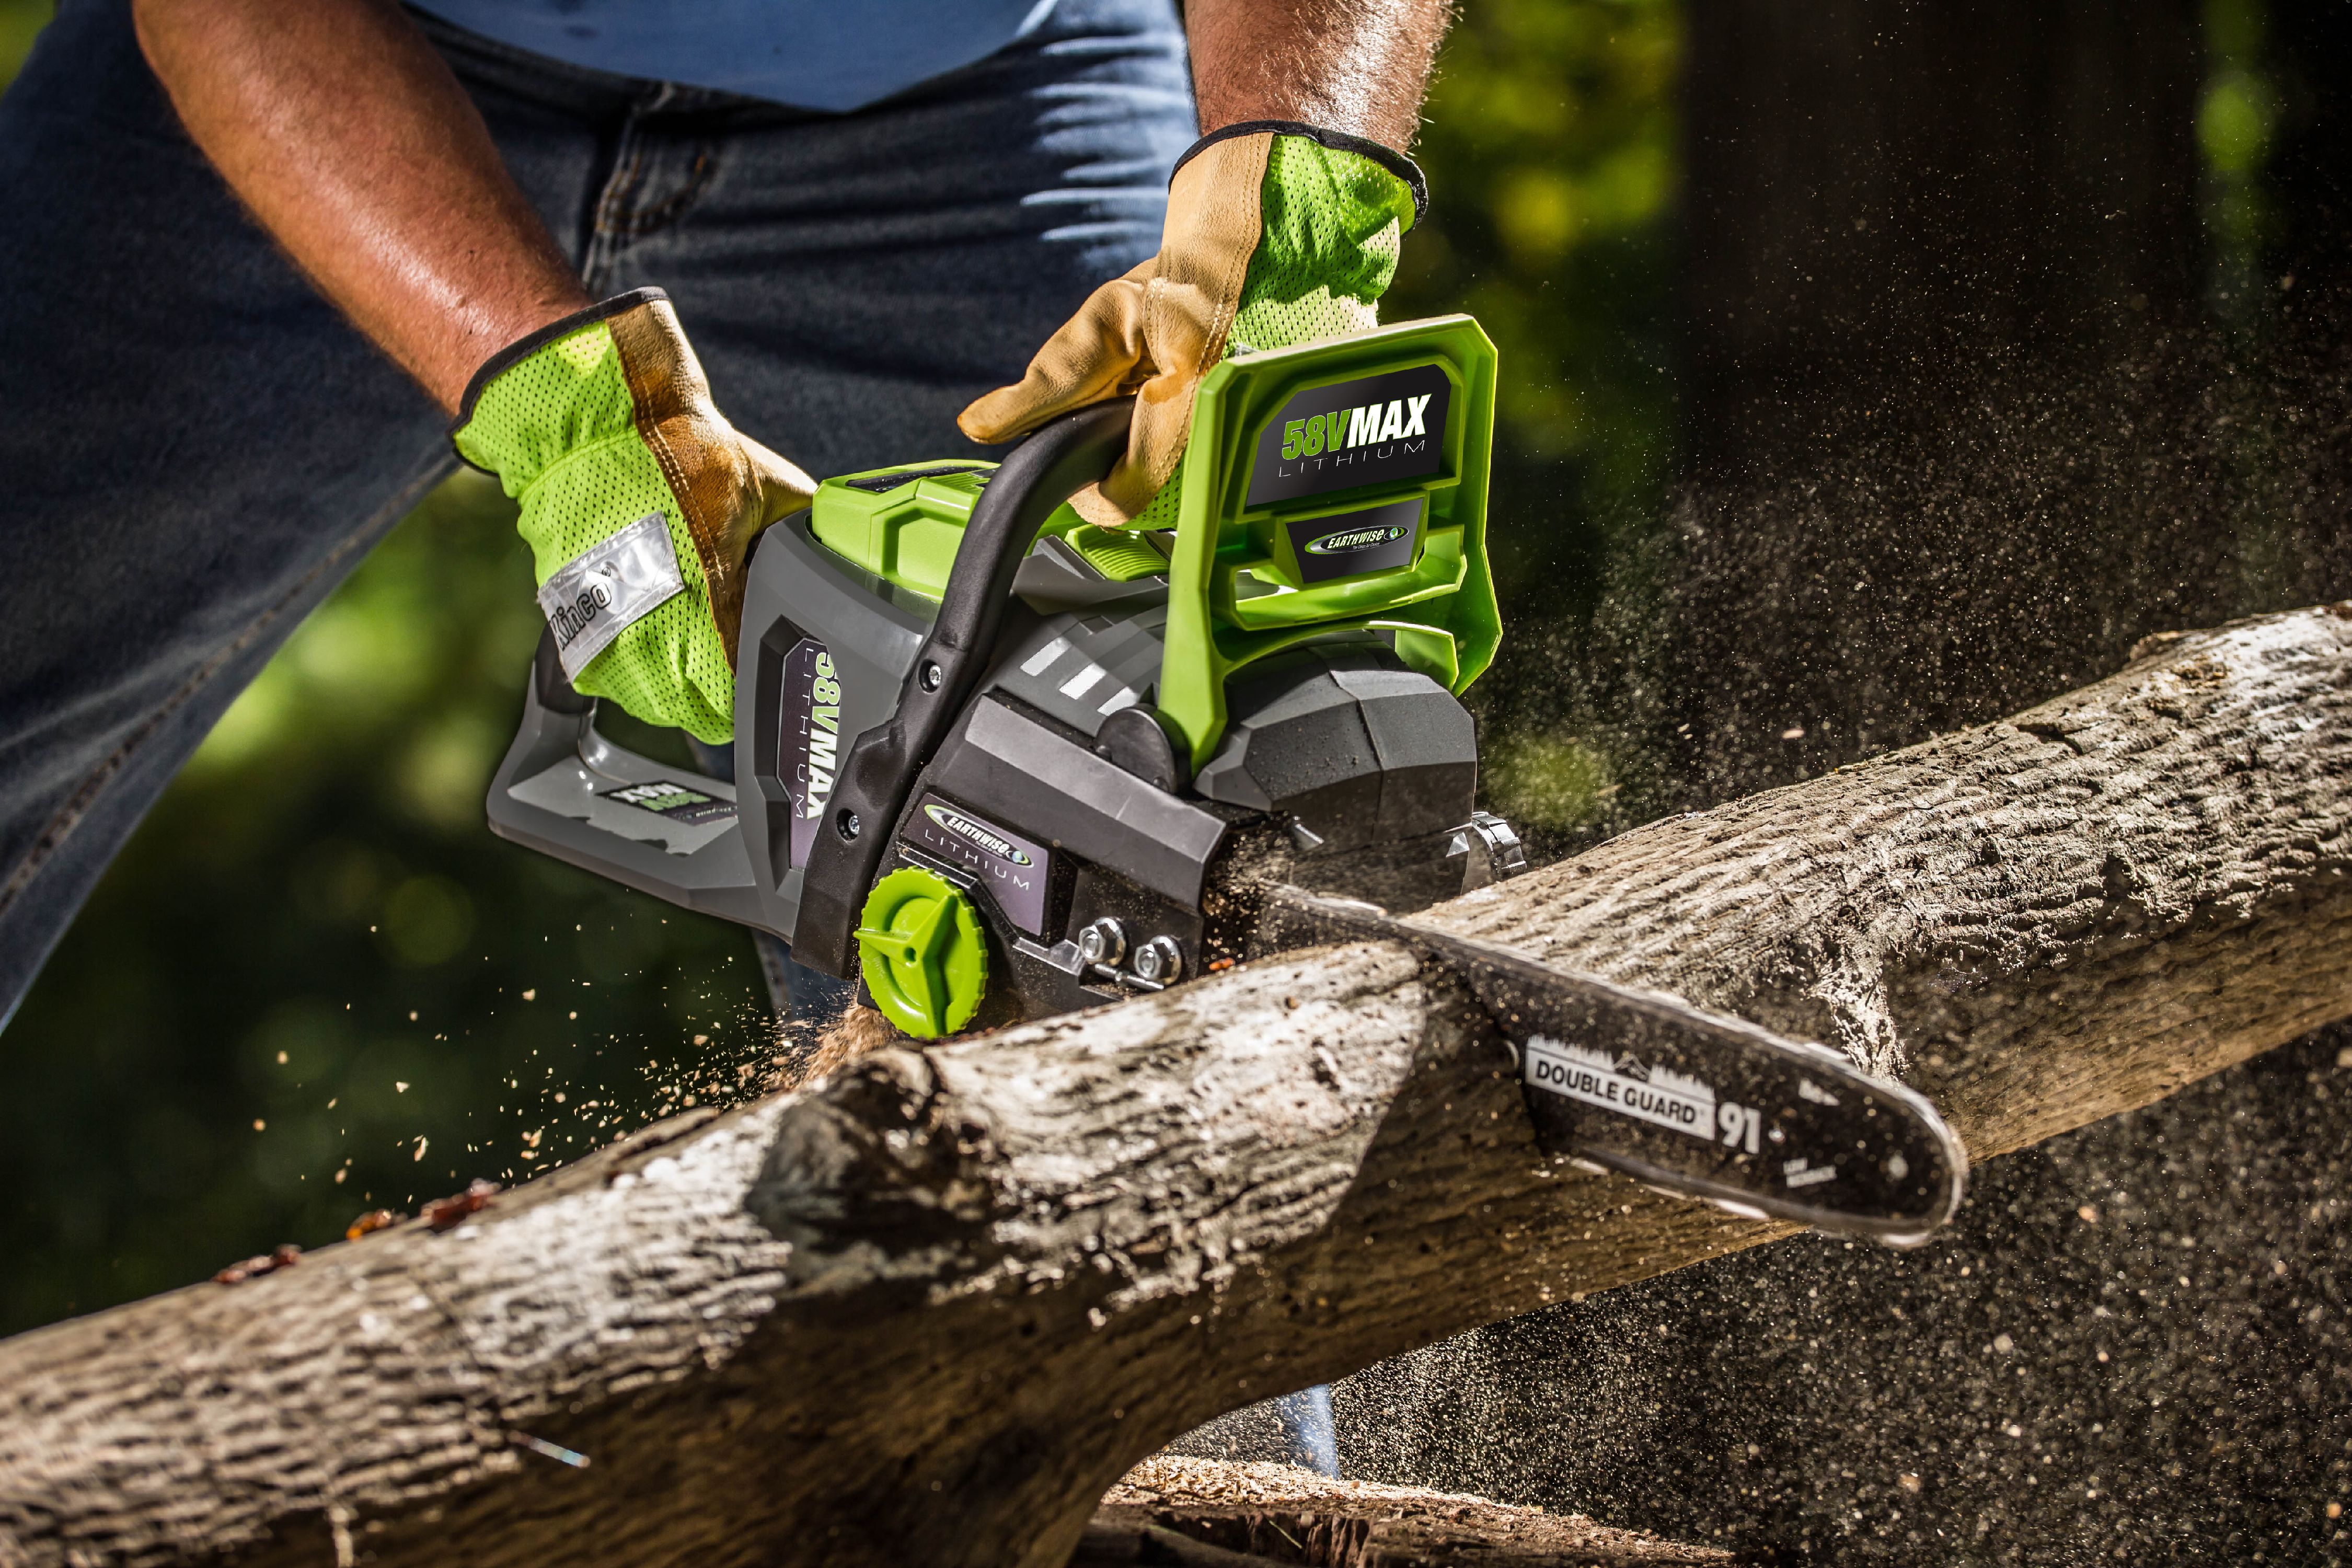 Earthwise LCS35814 14" 58-Volt Cordless Chainsaw, Brushless Motor (2Ah Battery and Charger Included) - image 5 of 5